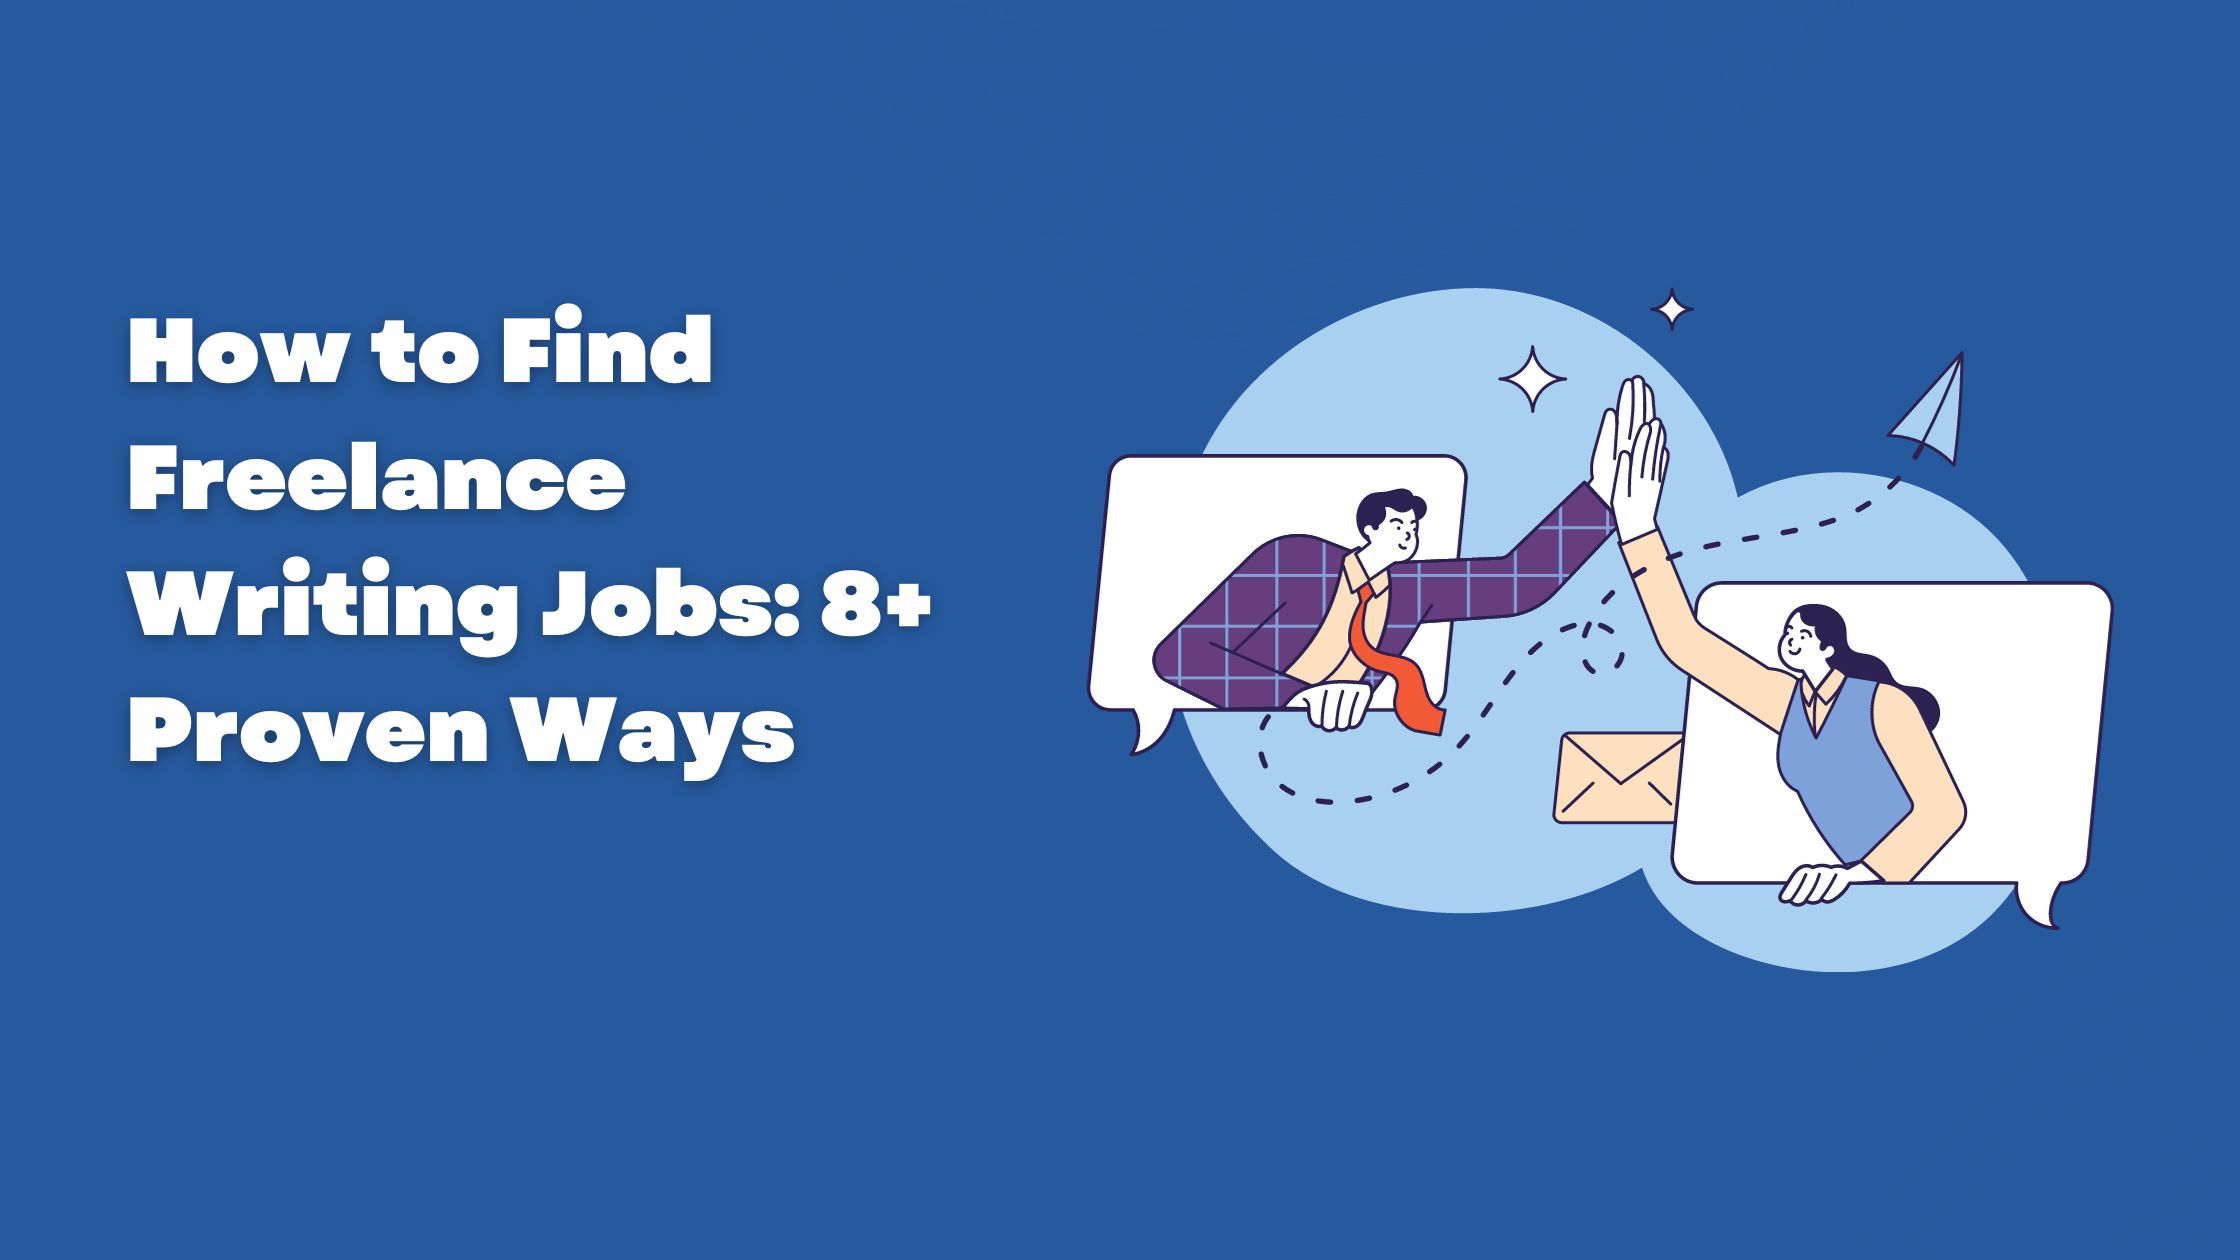 How to Find Freelance Writing Jobs: 8+ Proven Ways